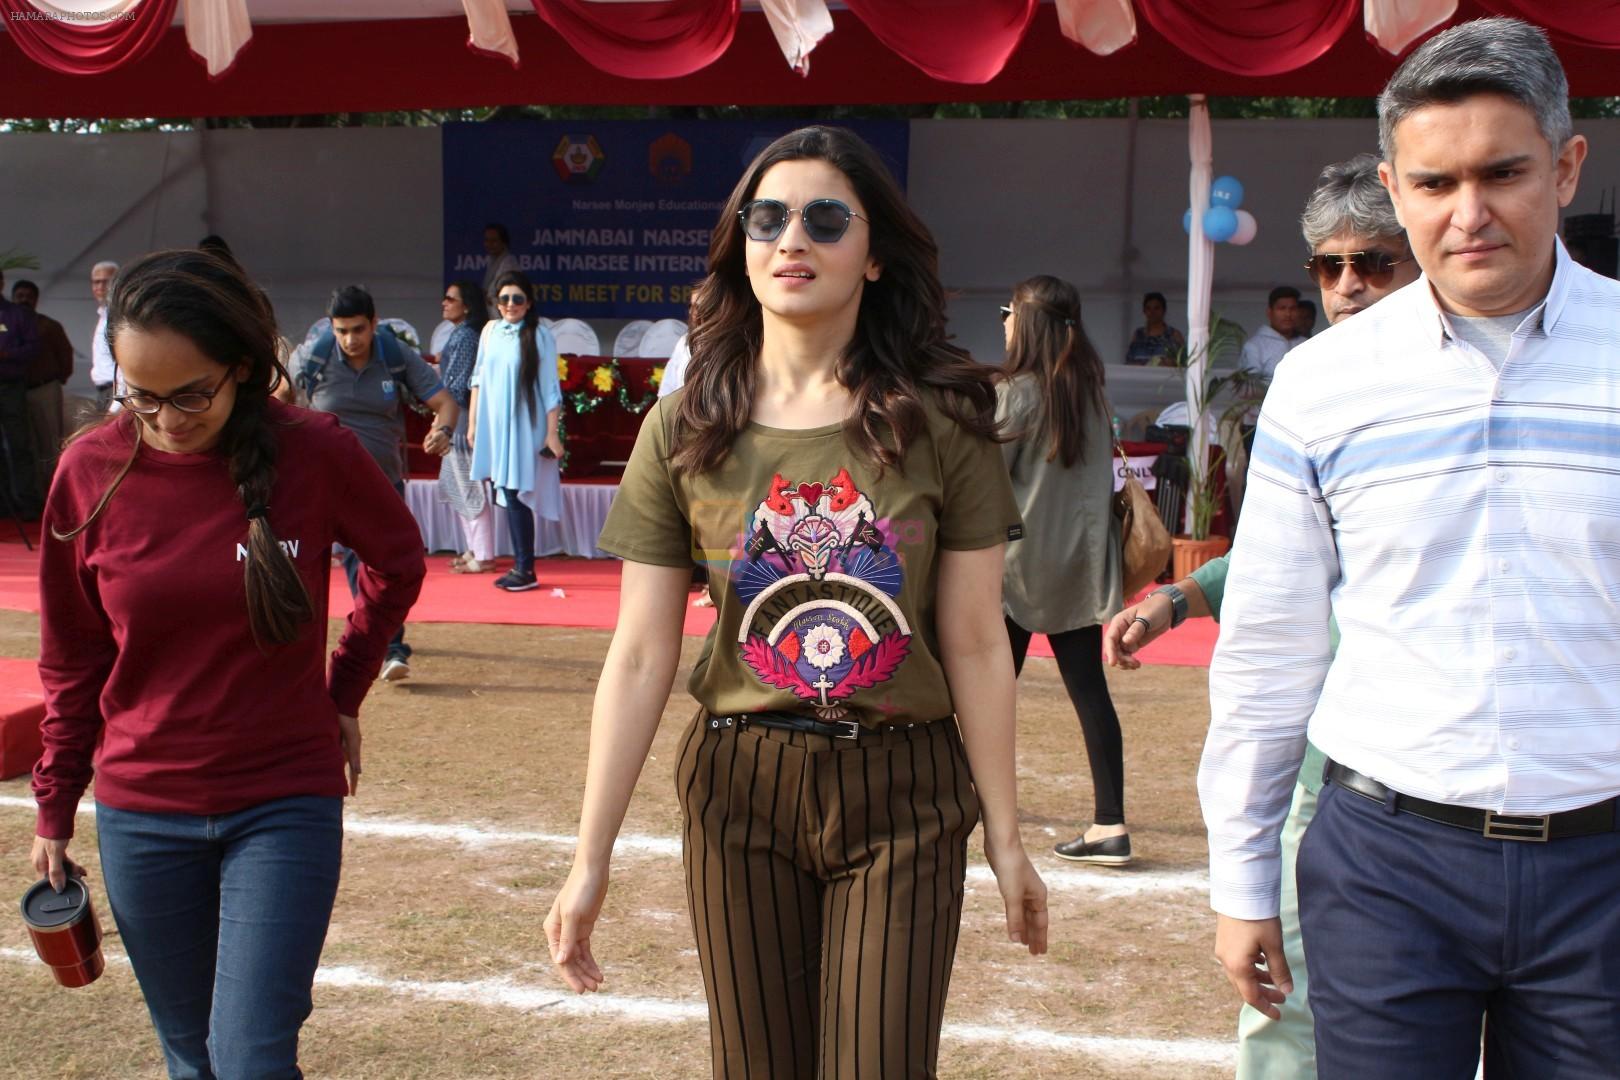 Alia Bhatt At Narsee Monjee Educational Trust Sports Meet For Special Children on 18th Dec 2017